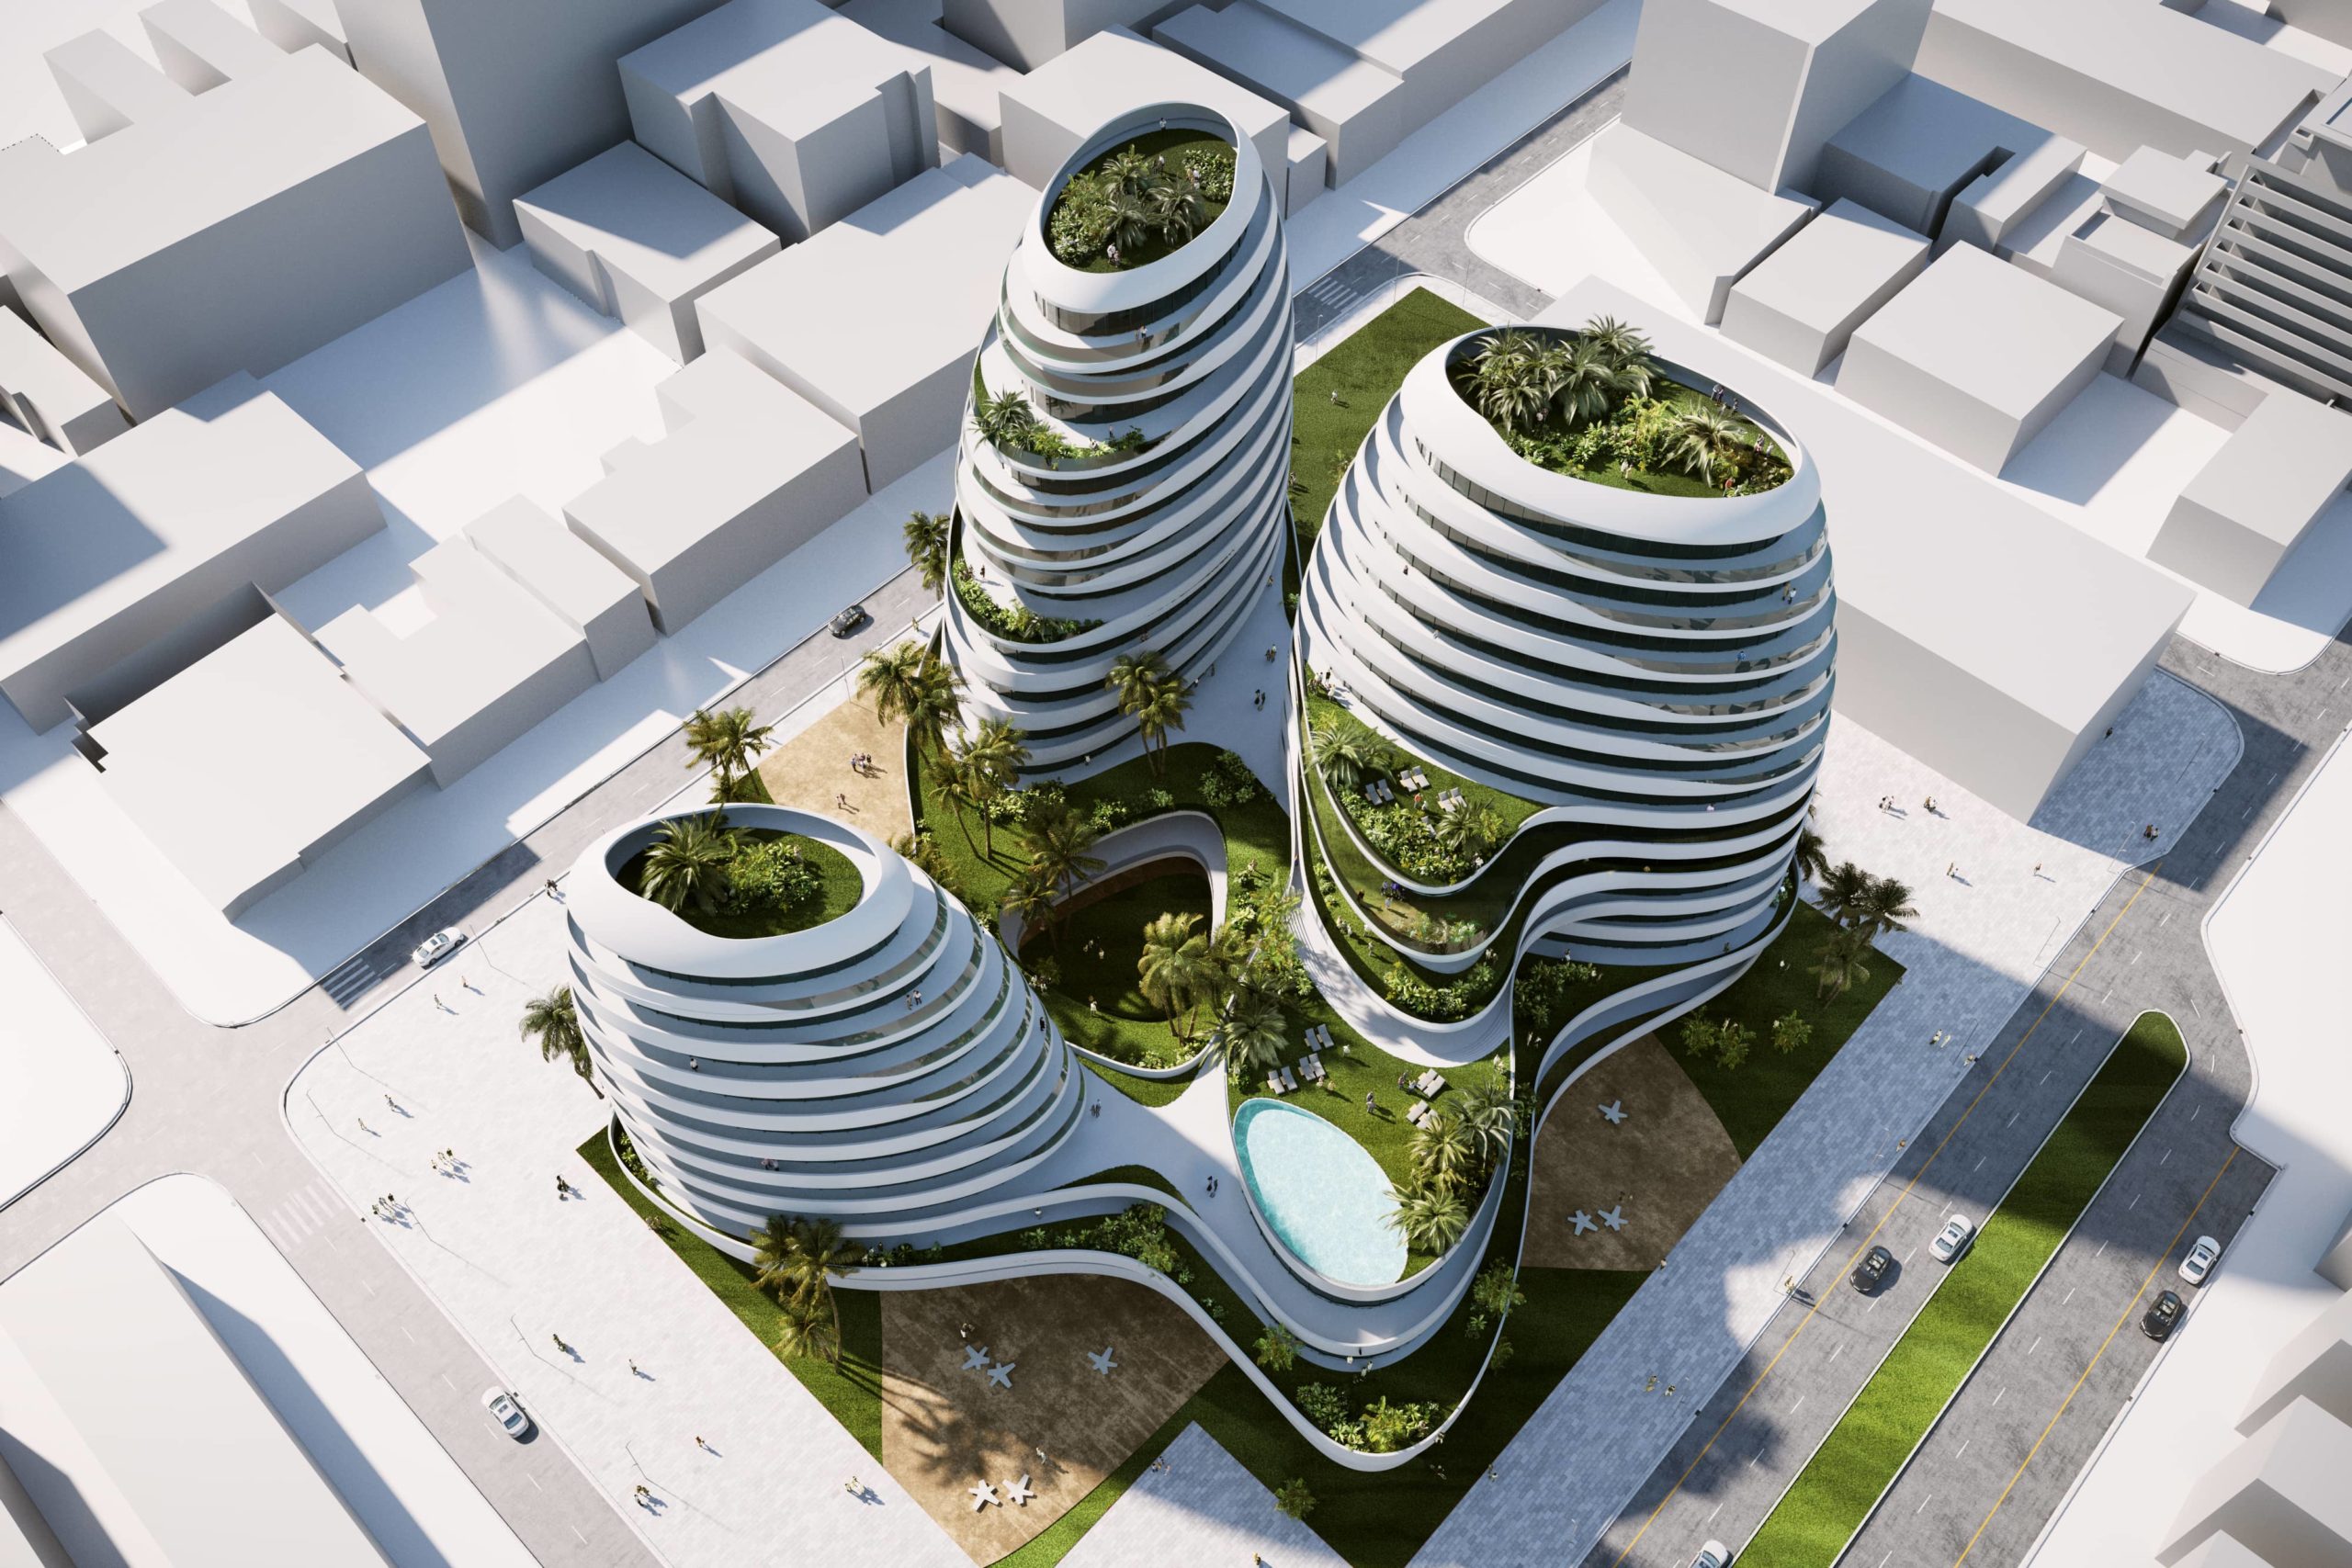 Urban Oasis is a mixed-use building in Algeria, where the main focus is on sustainability and natural elements combined with technology.